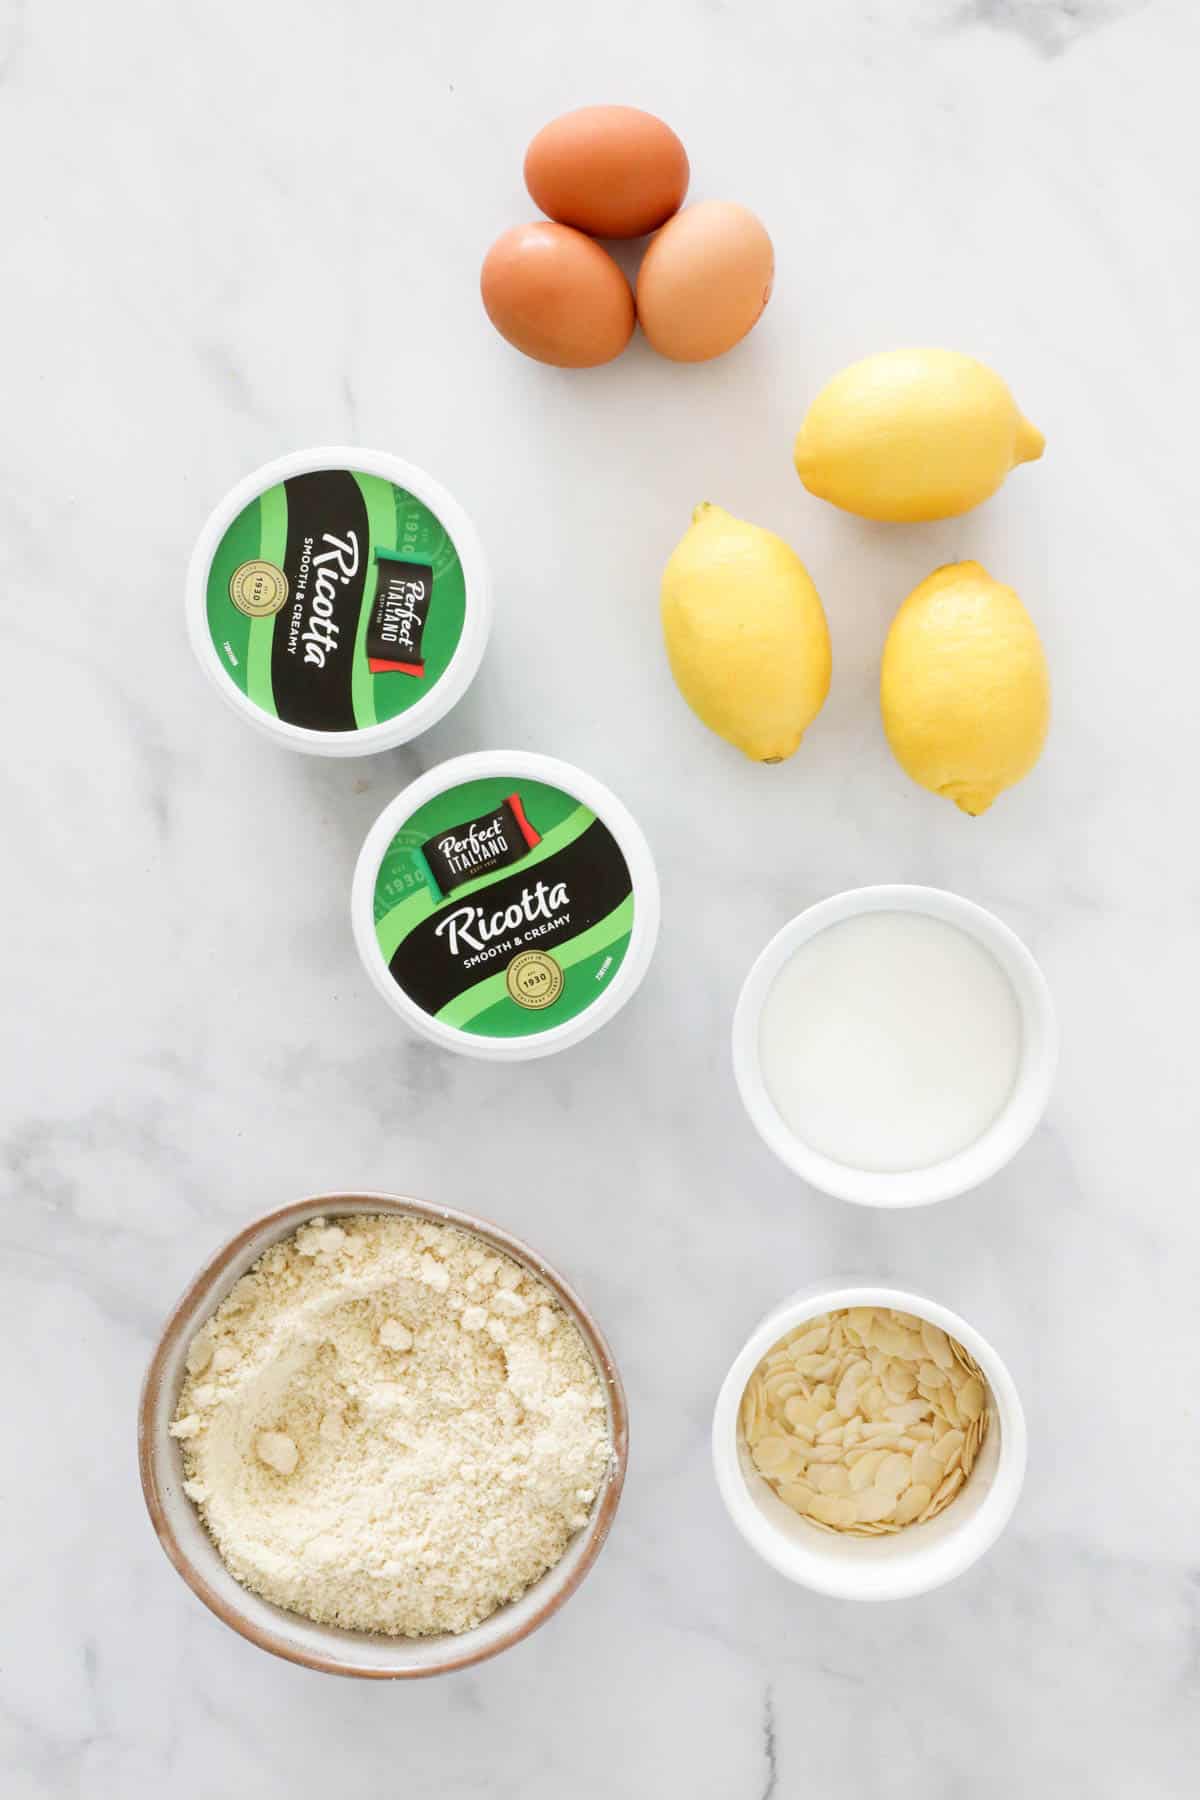 The ingredients for a Gluten-Free Thermomix Lemon & Ricotta Cake